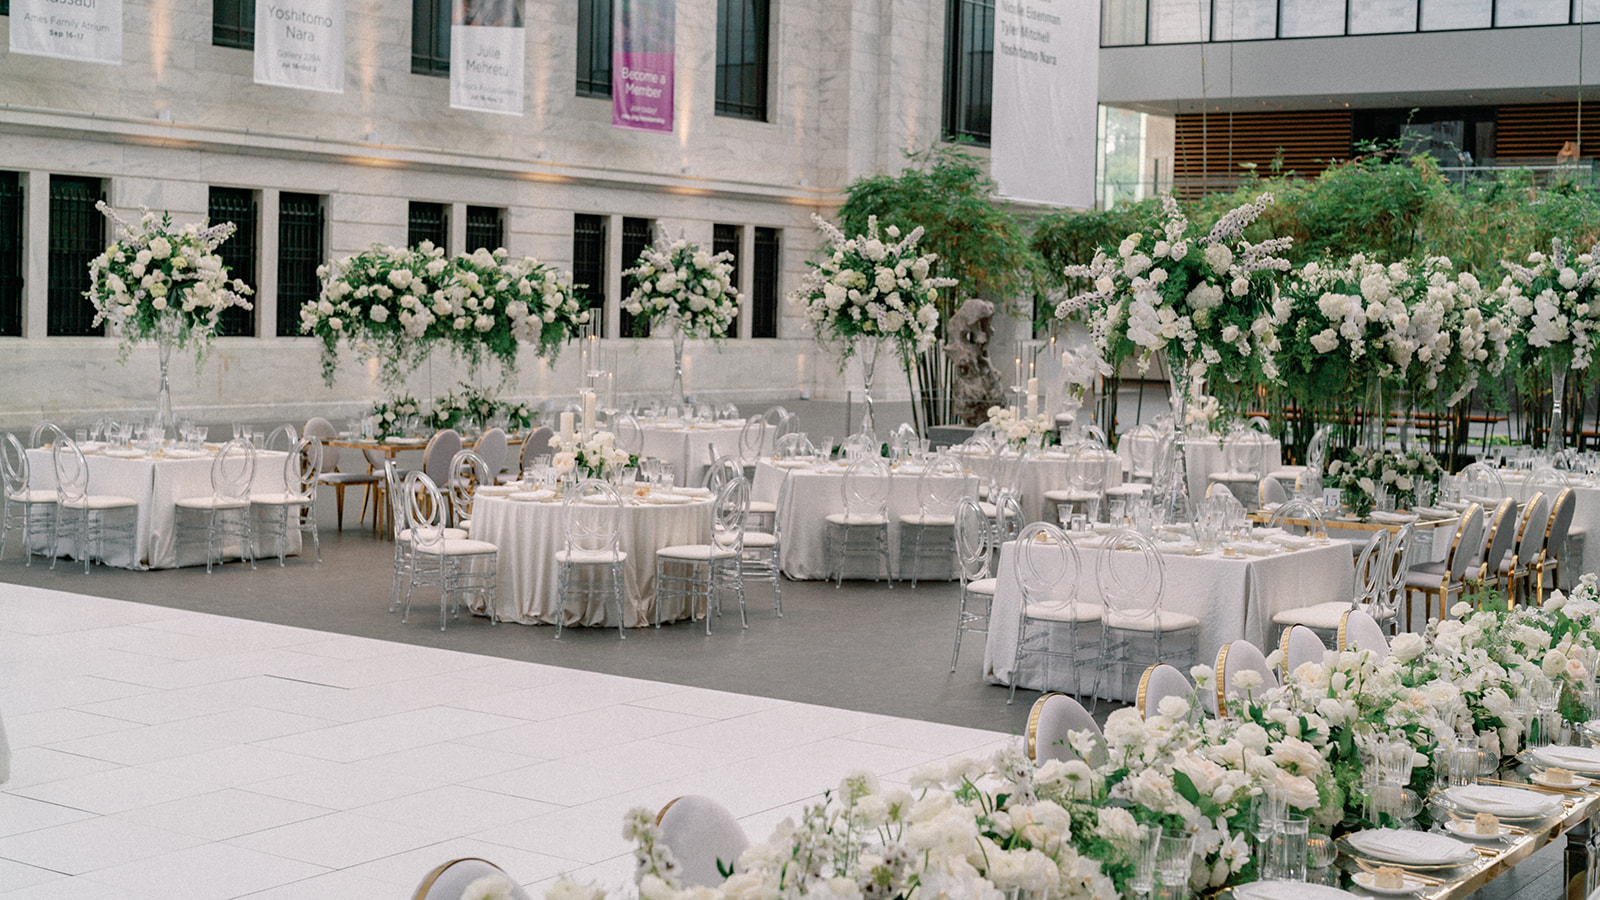 Cleveland Museum of Art, Gold and White Wedding Reception with elevated centerpieces at the Cleveland Museum of Art by HeatherLily